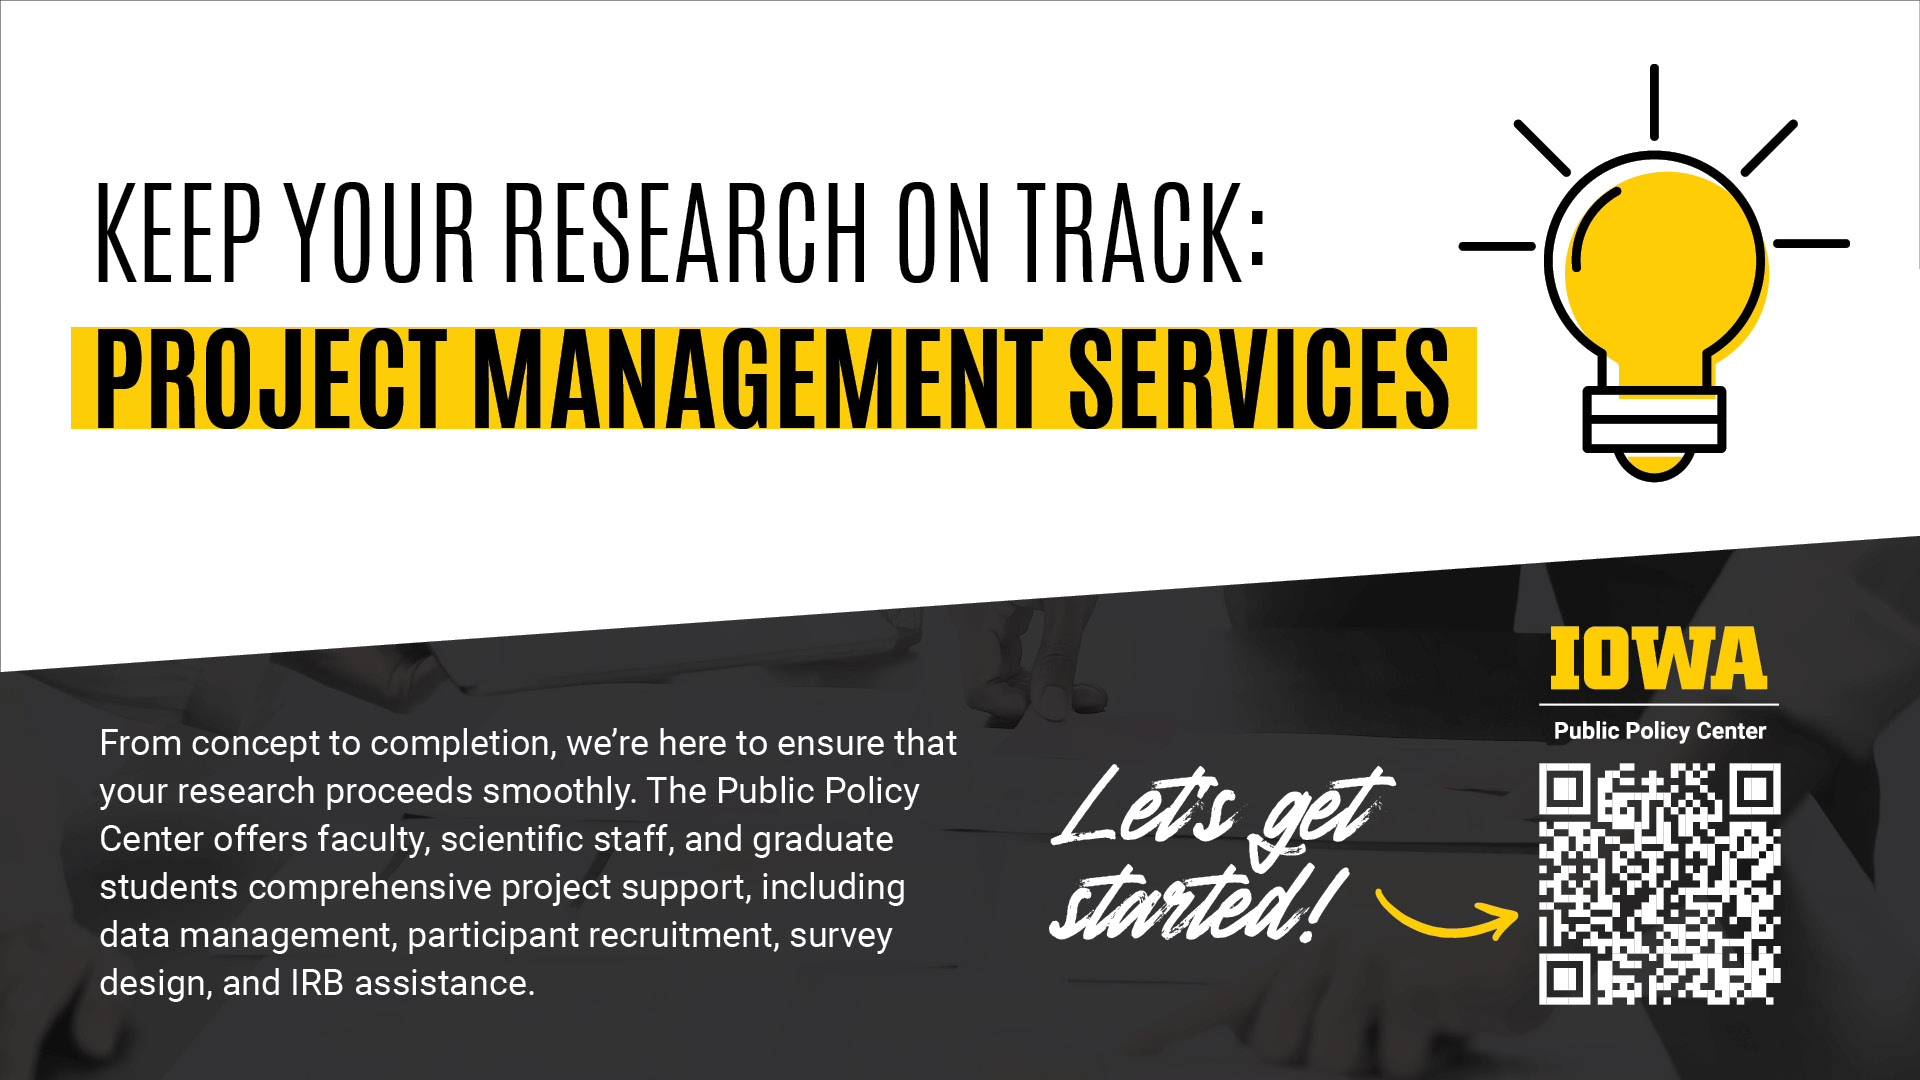 Text that says "Keep Your Research on Track: Project Management Services" next to a lightbulb icon and a description of the PPC's transcription services.